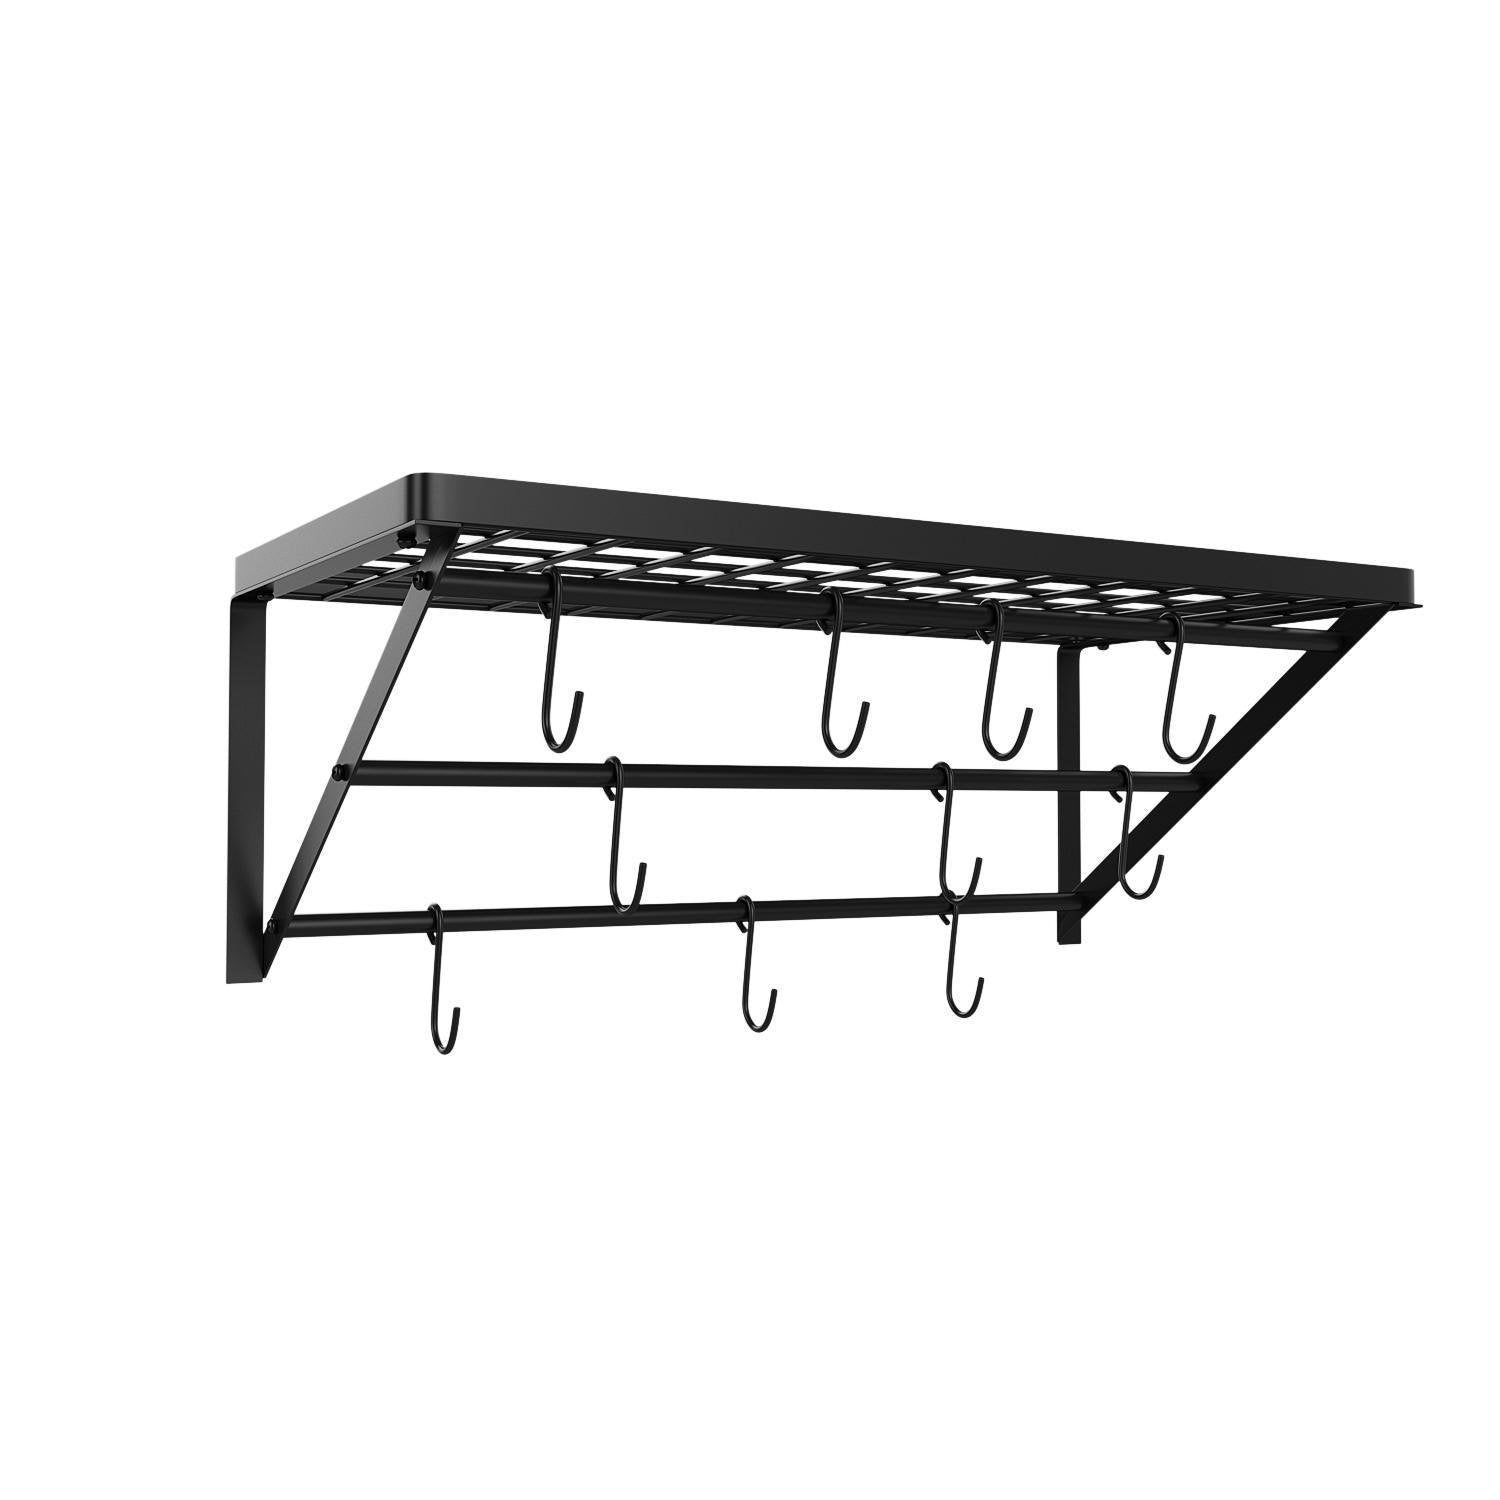 Kitchen kaluo 3 tier hanging wall mount pot rack kitchen storage shelf with 10 hooks for kitchen cookware utensils pans household items